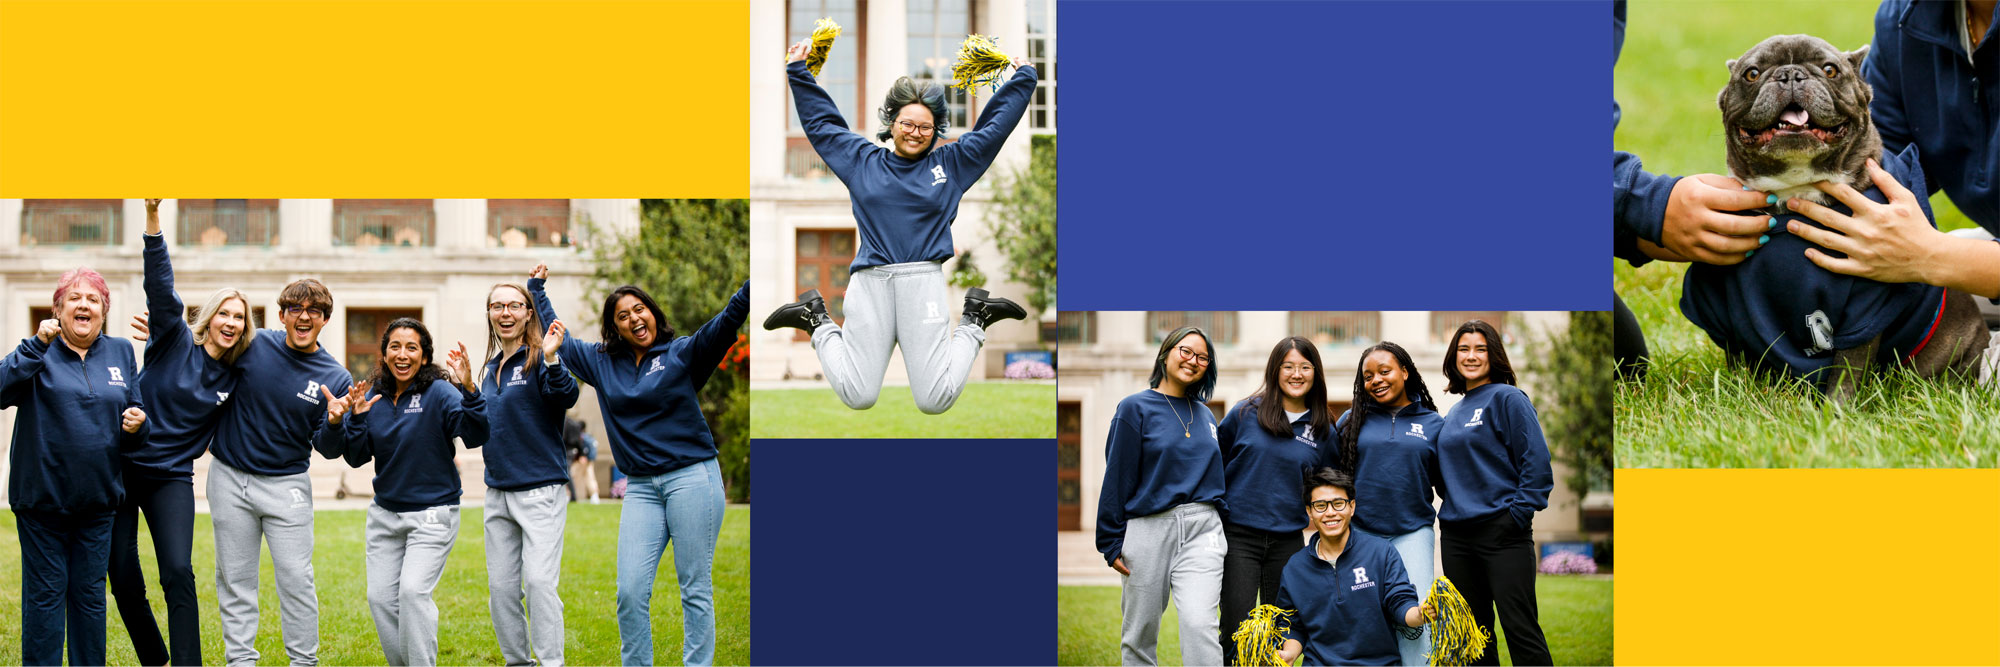 collage of students wearing Rochester comfy gear